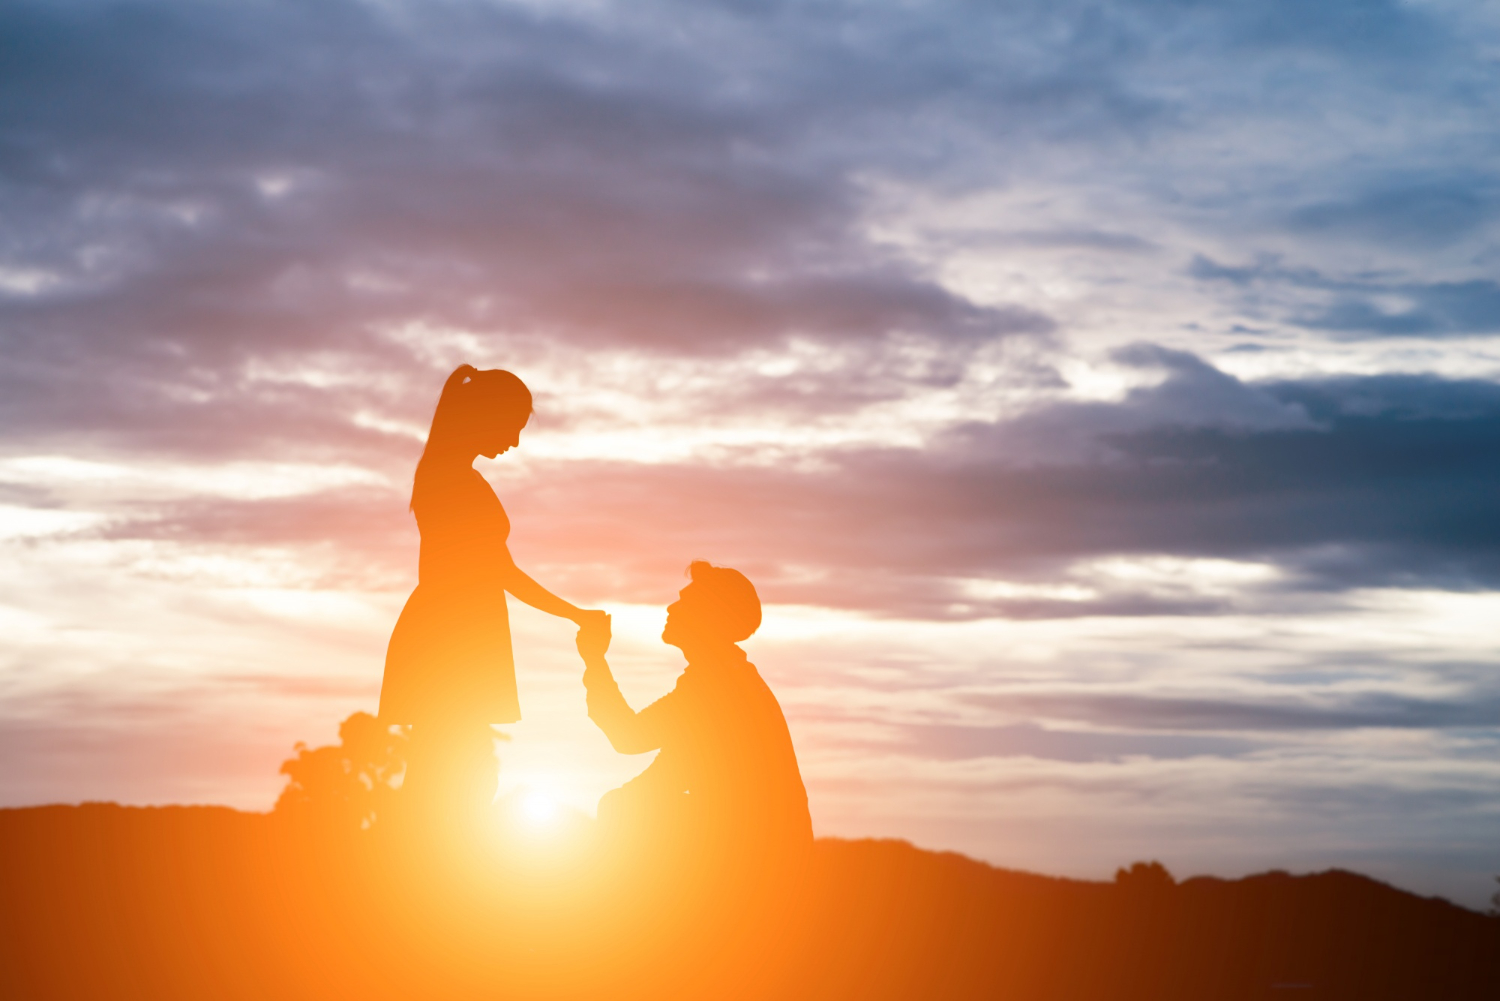 A man is proposing to a woman while the sun is rising